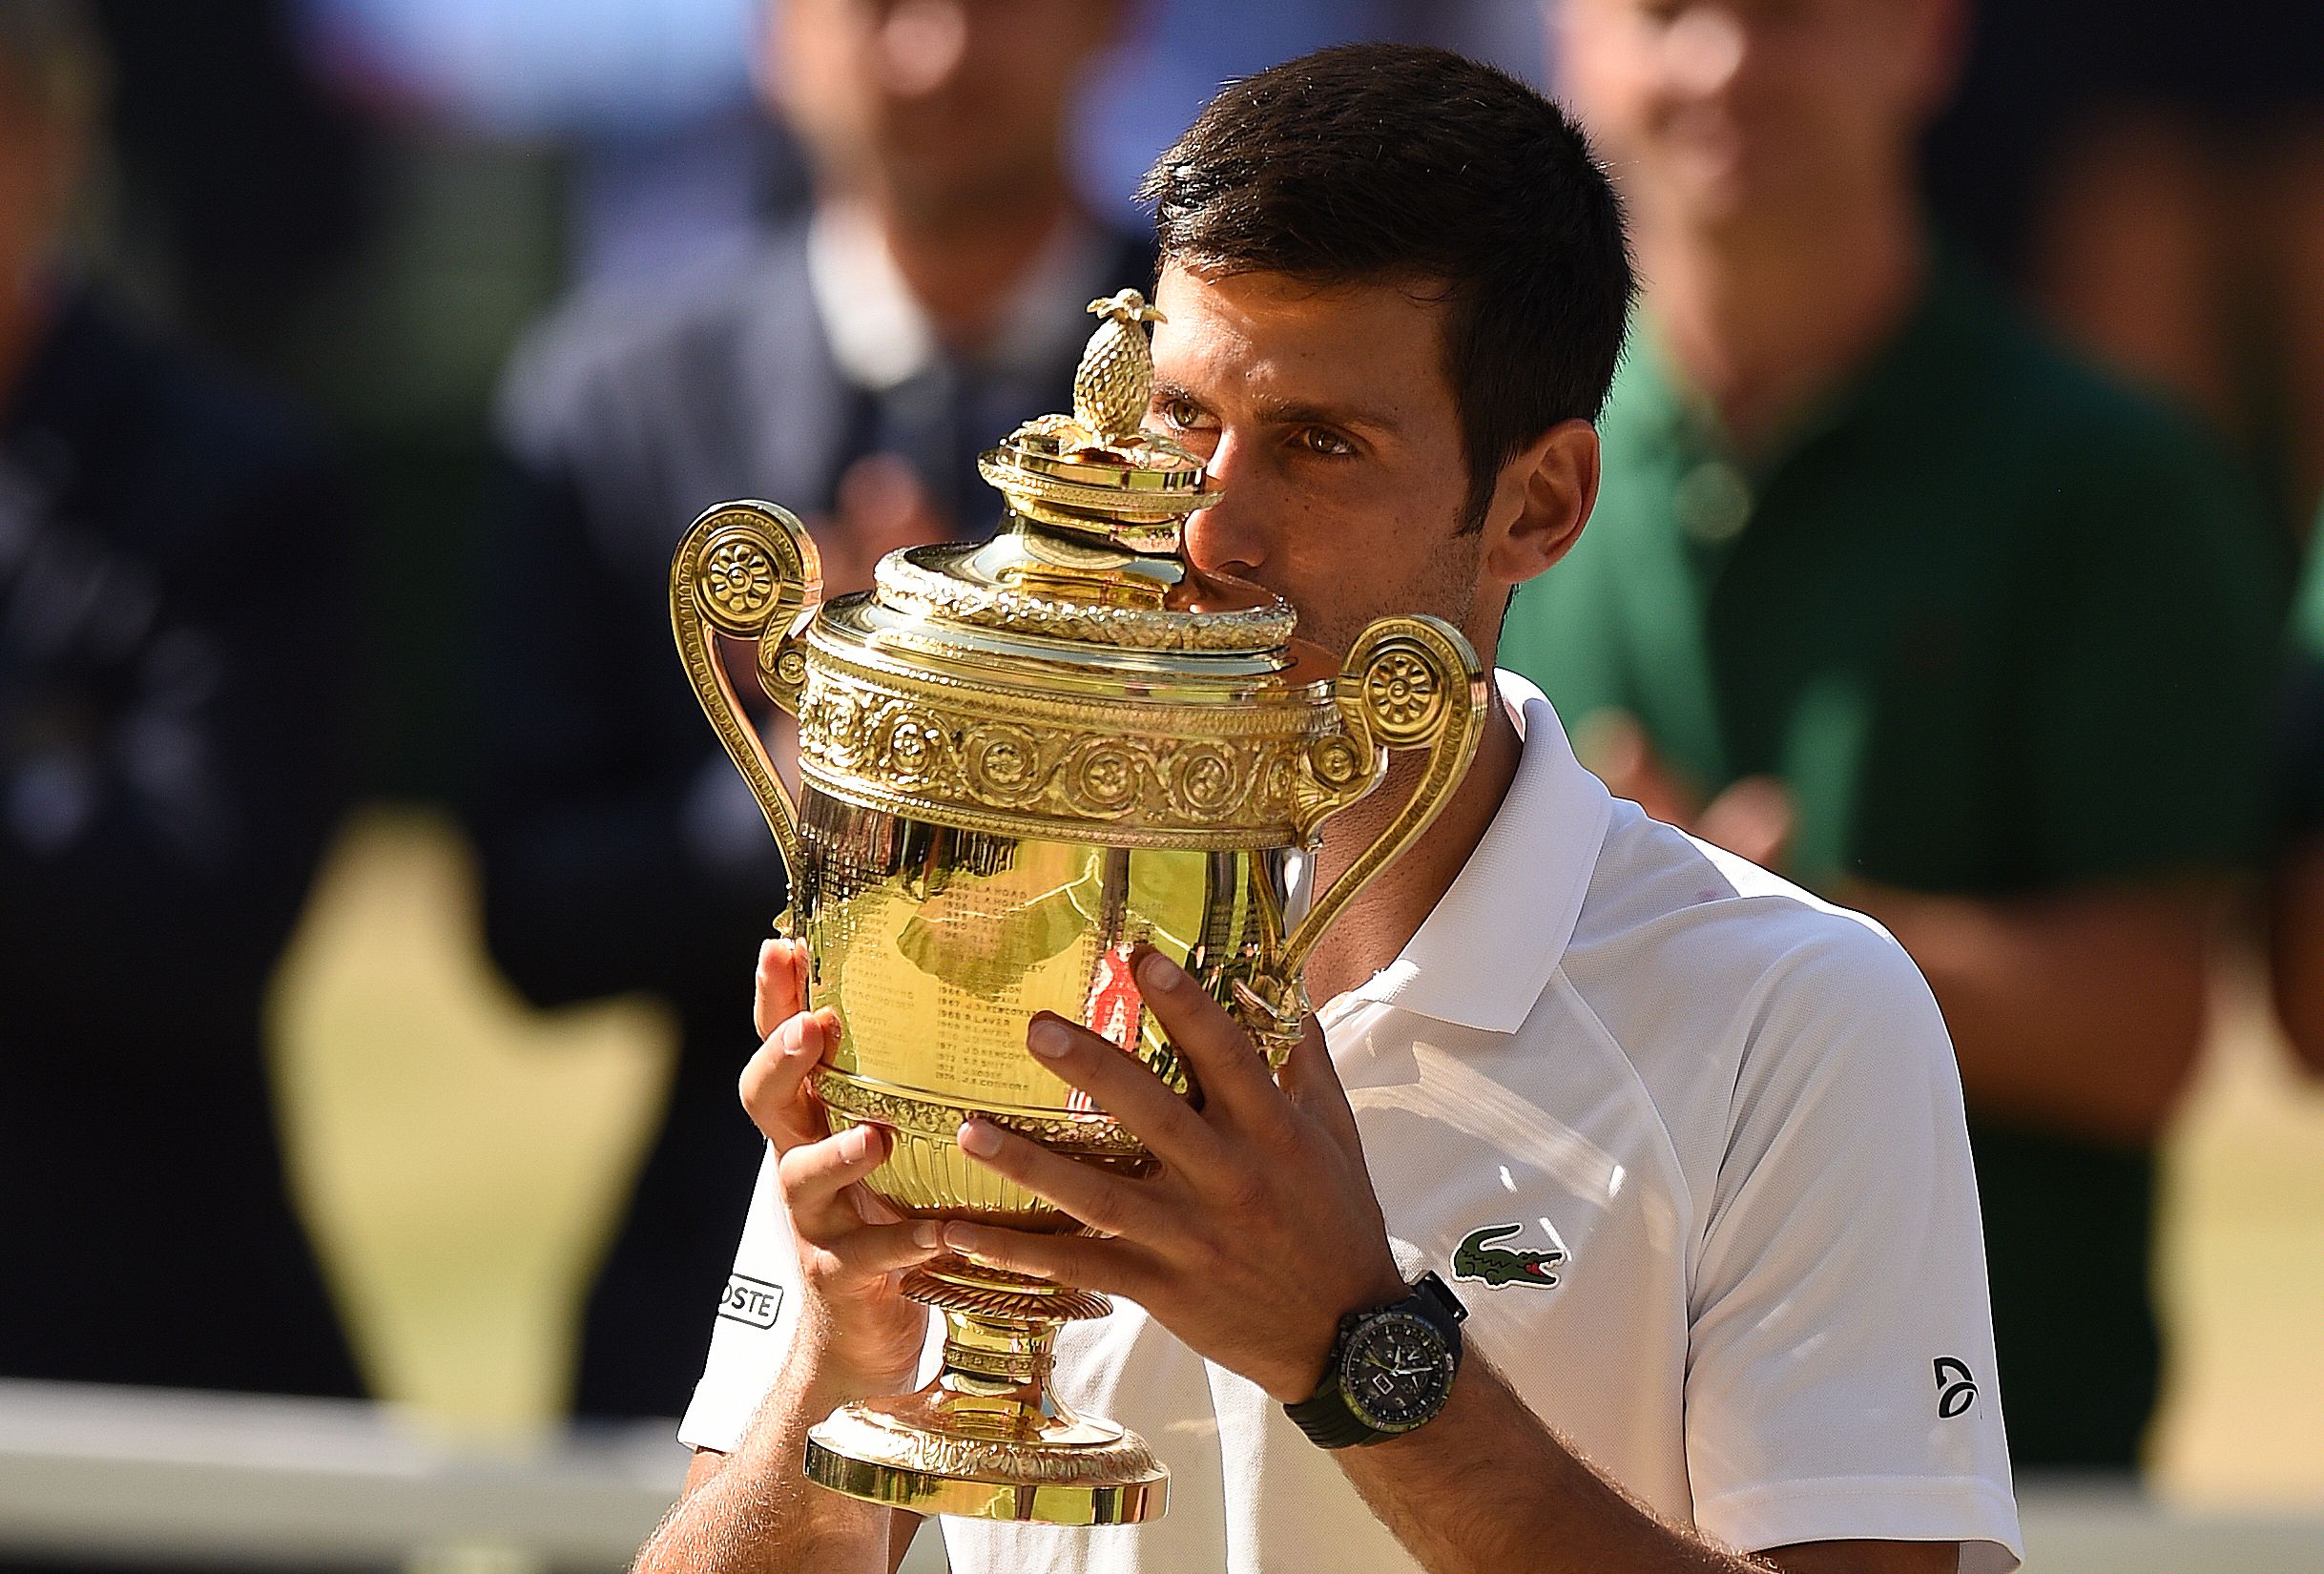 Djokovic wins first Slam since June 2016—his 13th overall—at Wimbledon